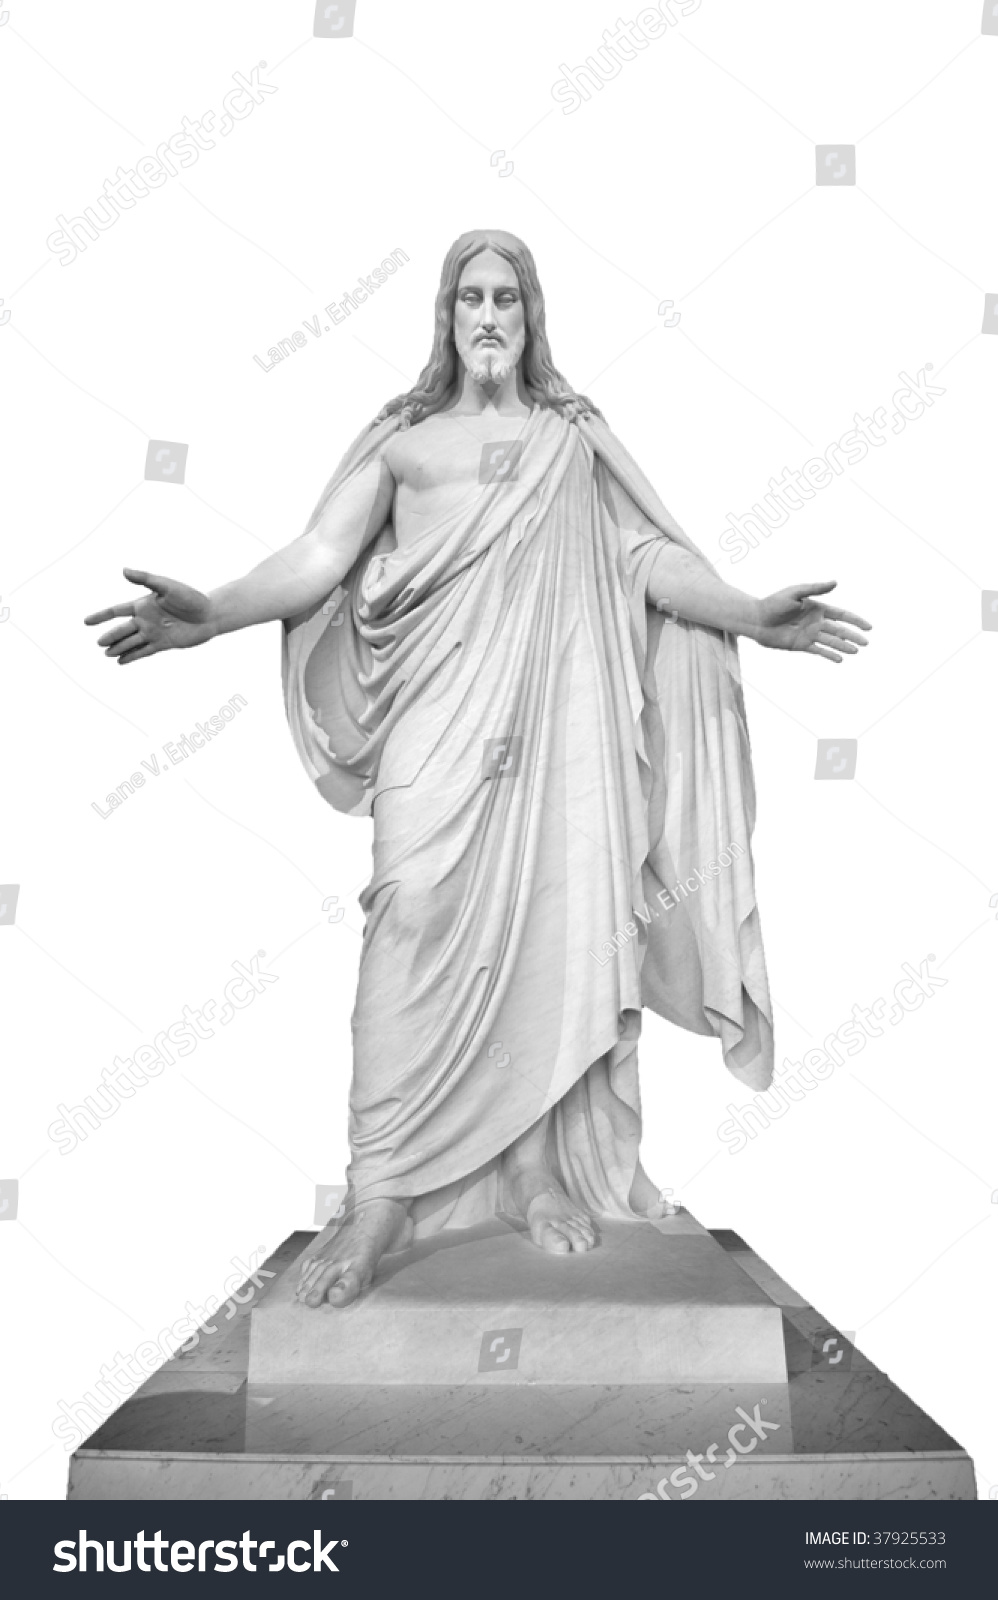 clipart jesus outstretched hands - photo #32